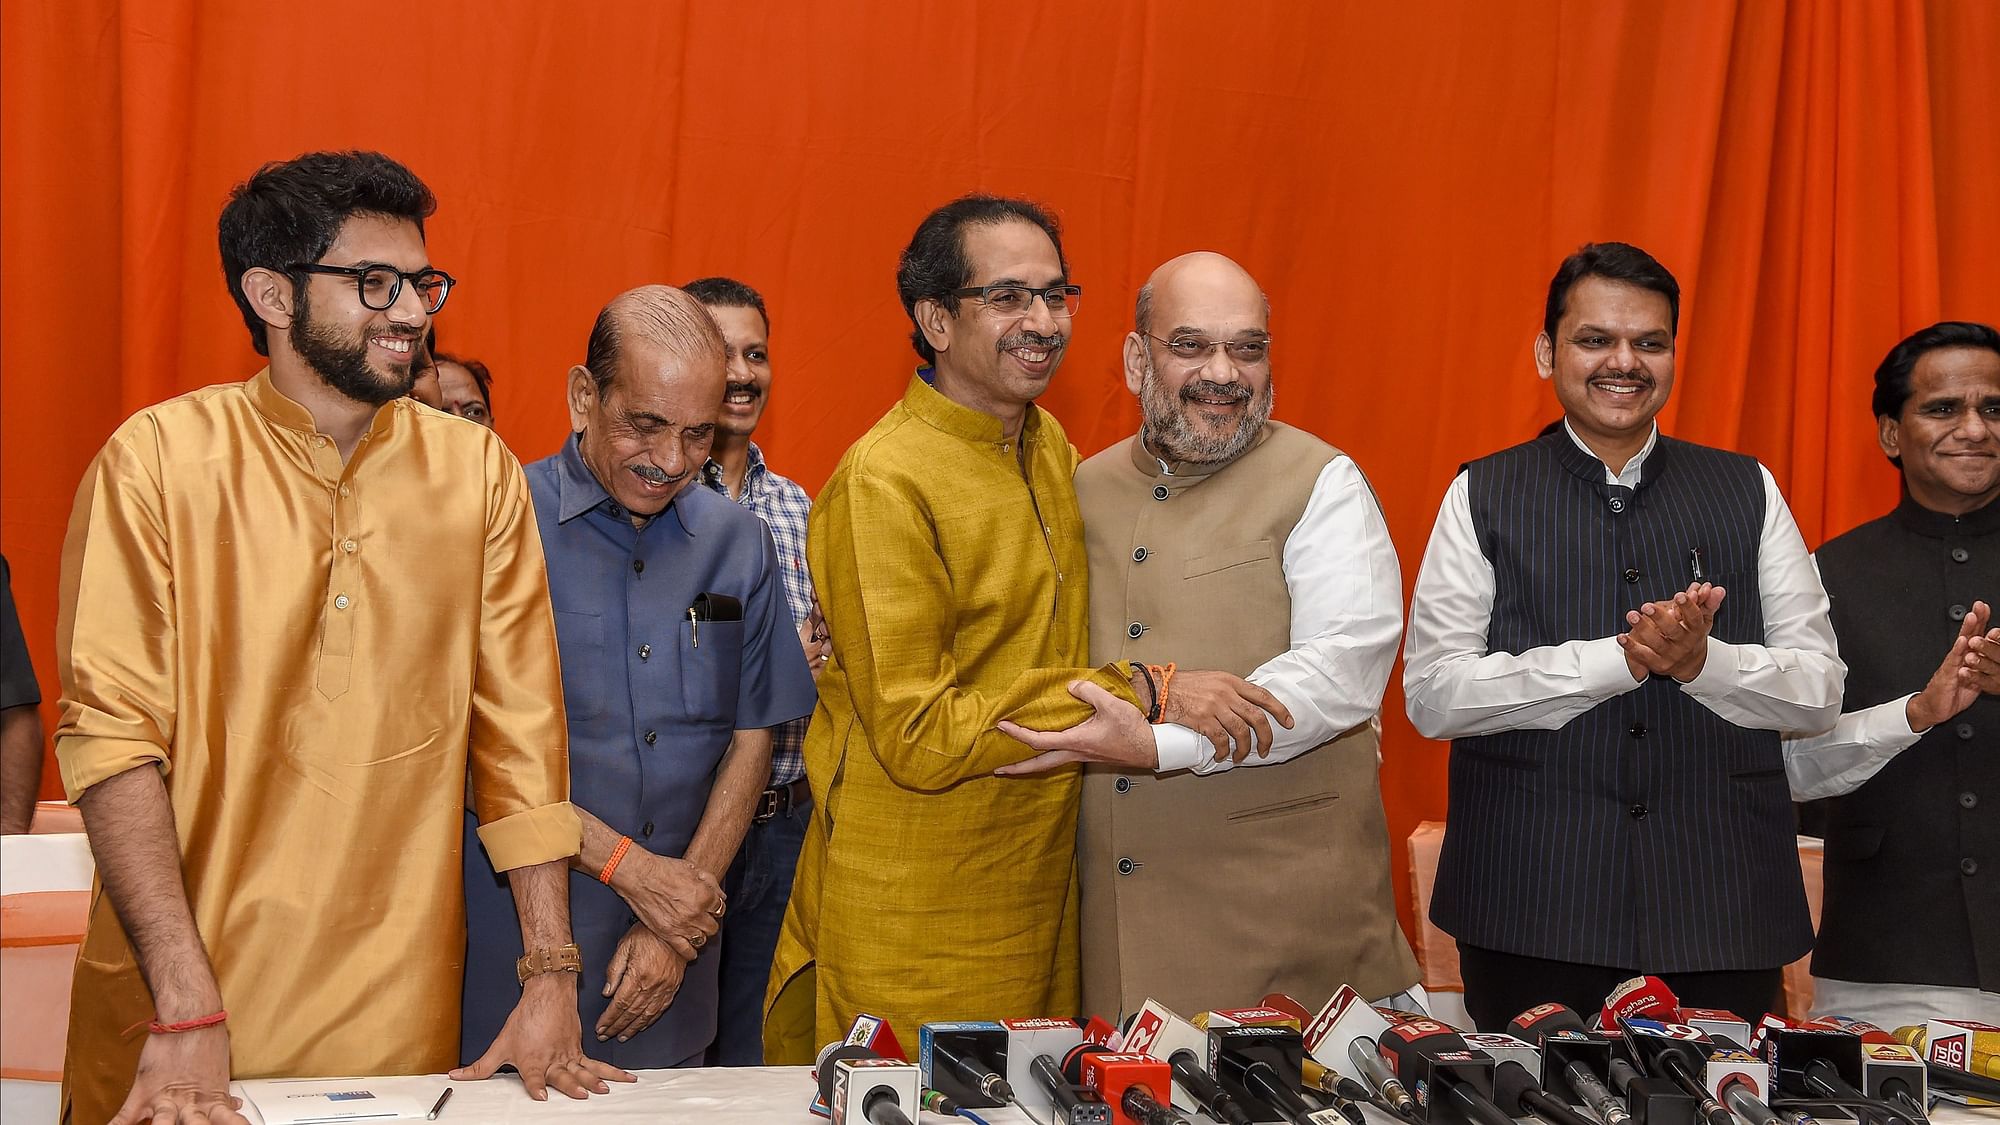 BJP President Amit Shah hugs Shiv Sena President Uddhav Thackeray after announcement of an alliance between Shiv Sena and BJP for Lok Sabha and Assembly polls, in Mumbai on Monday, 18 February, 2019.